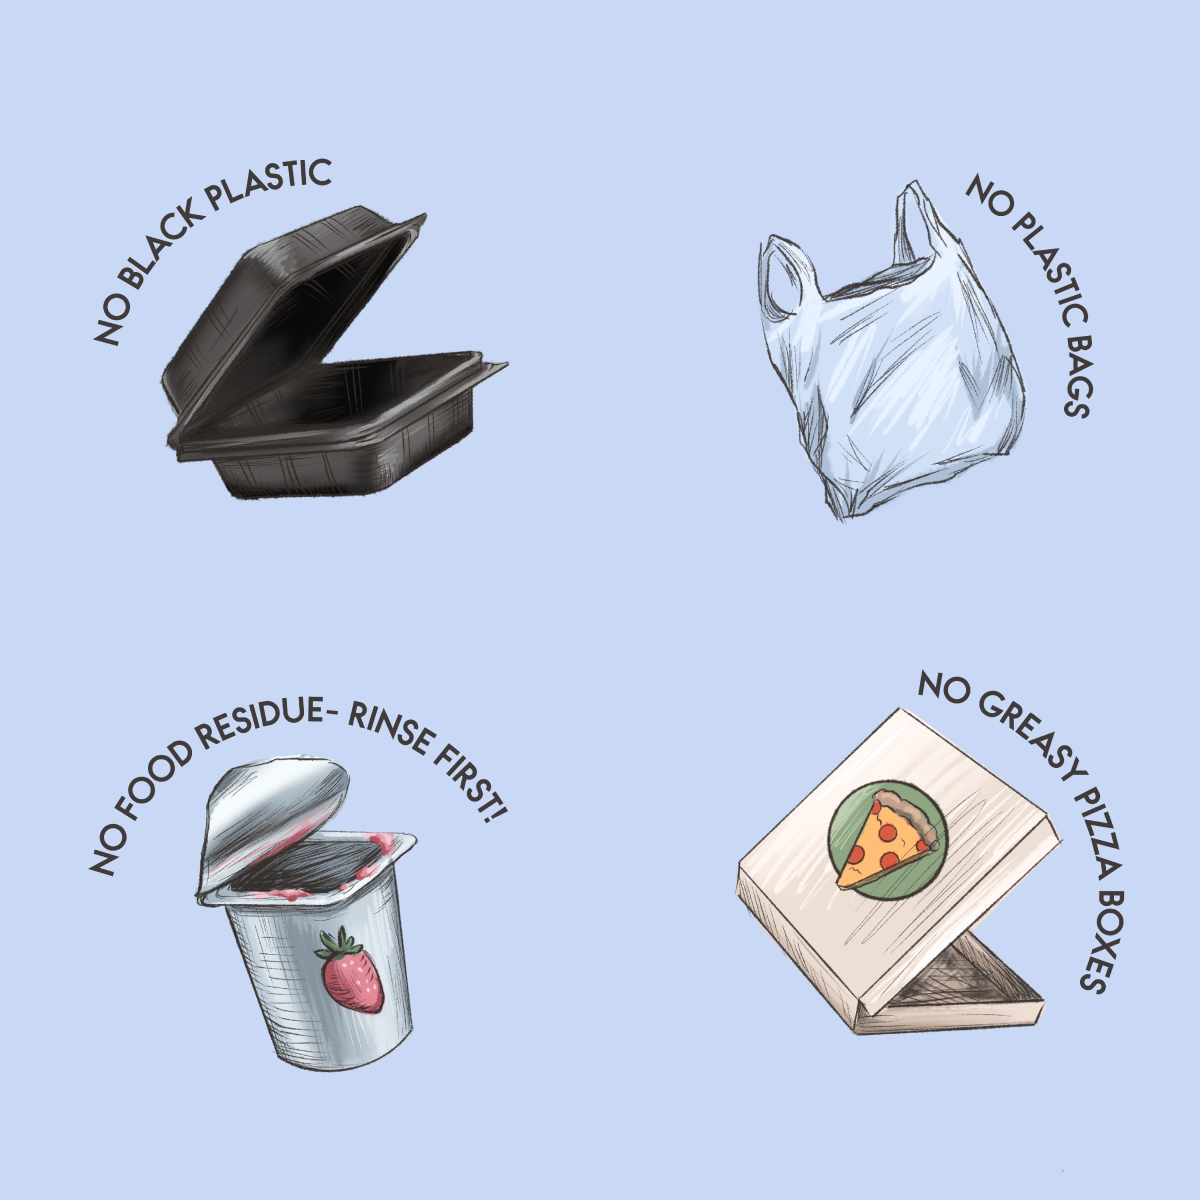 An illustration showing common items that are not recyclable at Yale